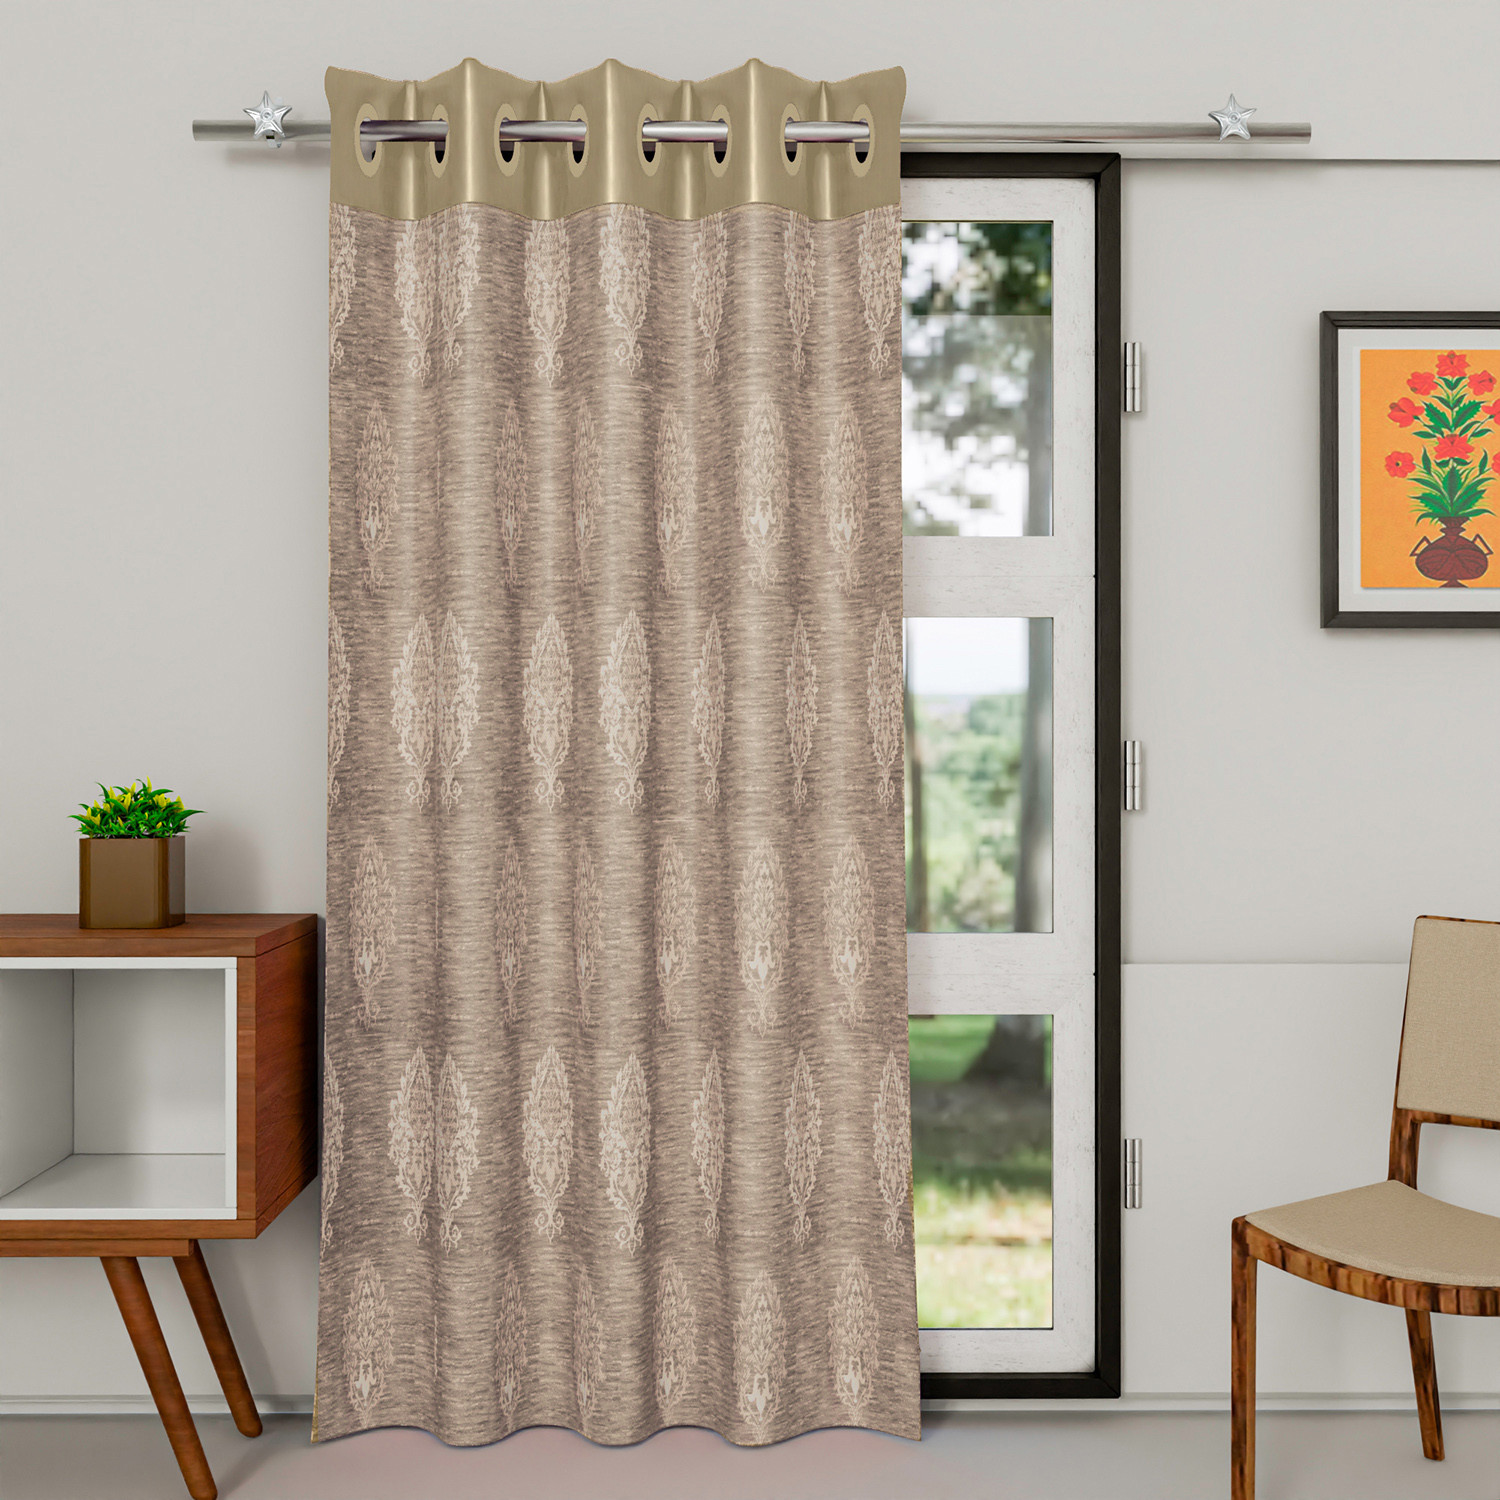 Kuber Industries Faux Silk Decorative 9 Feet Long Door Curtain | Damask Print Blackout Drapes Curtain With 8 Eyelet For Home & Office (Cream)